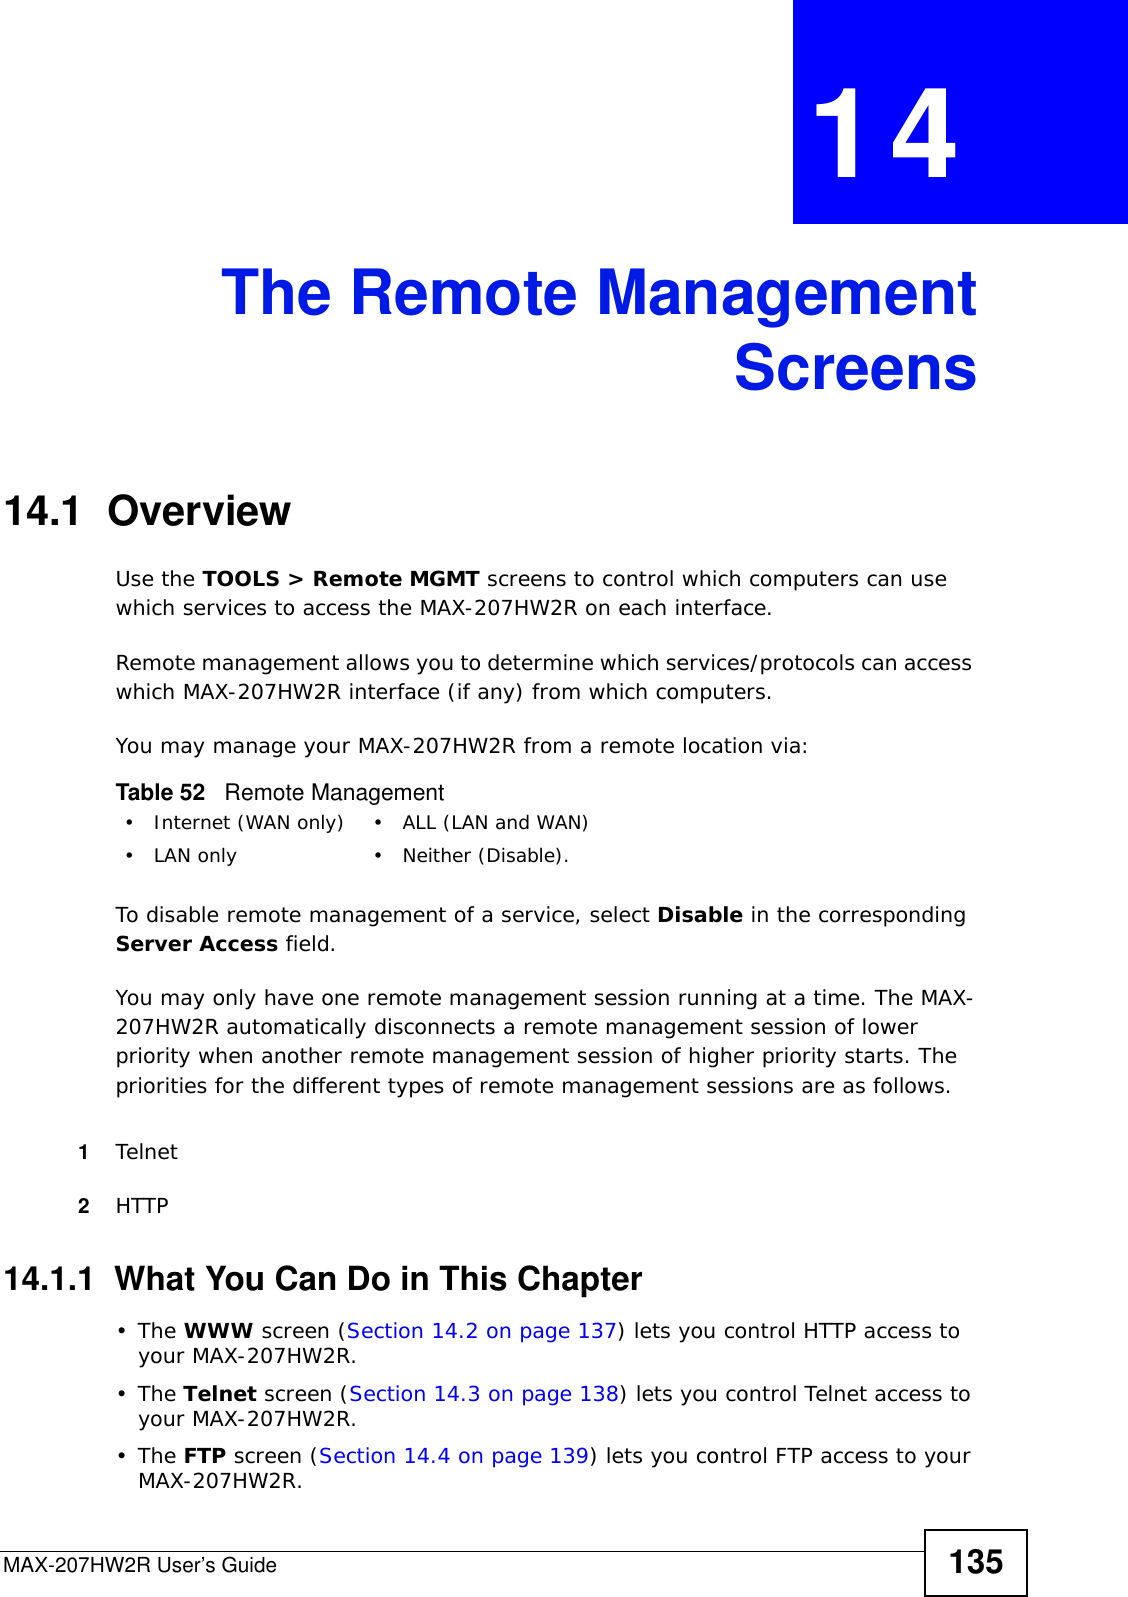 MAX-207HW2R User’s Guide 135CHAPTER  14 The Remote ManagementScreens14.1  OverviewUse the TOOLS &gt; Remote MGMT screens to control which computers can use which services to access the MAX-207HW2R on each interface.Remote management allows you to determine which services/protocols can access which MAX-207HW2R interface (if any) from which computers.You may manage your MAX-207HW2R from a remote location via:To disable remote management of a service, select Disable in the corresponding Server Access field.You may only have one remote management session running at a time. The MAX-207HW2R automatically disconnects a remote management session of lower priority when another remote management session of higher priority starts. The priorities for the different types of remote management sessions are as follows.1Telnet2HTTP14.1.1  What You Can Do in This Chapter•The WWW screen (Section 14.2 on page 137) lets you control HTTP access to your MAX-207HW2R.•The Telnet screen (Section 14.3 on page 138) lets you control Telnet access to your MAX-207HW2R.•The FTP screen (Section 14.4 on page 139) lets you control FTP access to your MAX-207HW2R.Table 52   Remote Management• Internet (WAN only) • ALL (LAN and WAN)• LAN only • Neither (Disable).